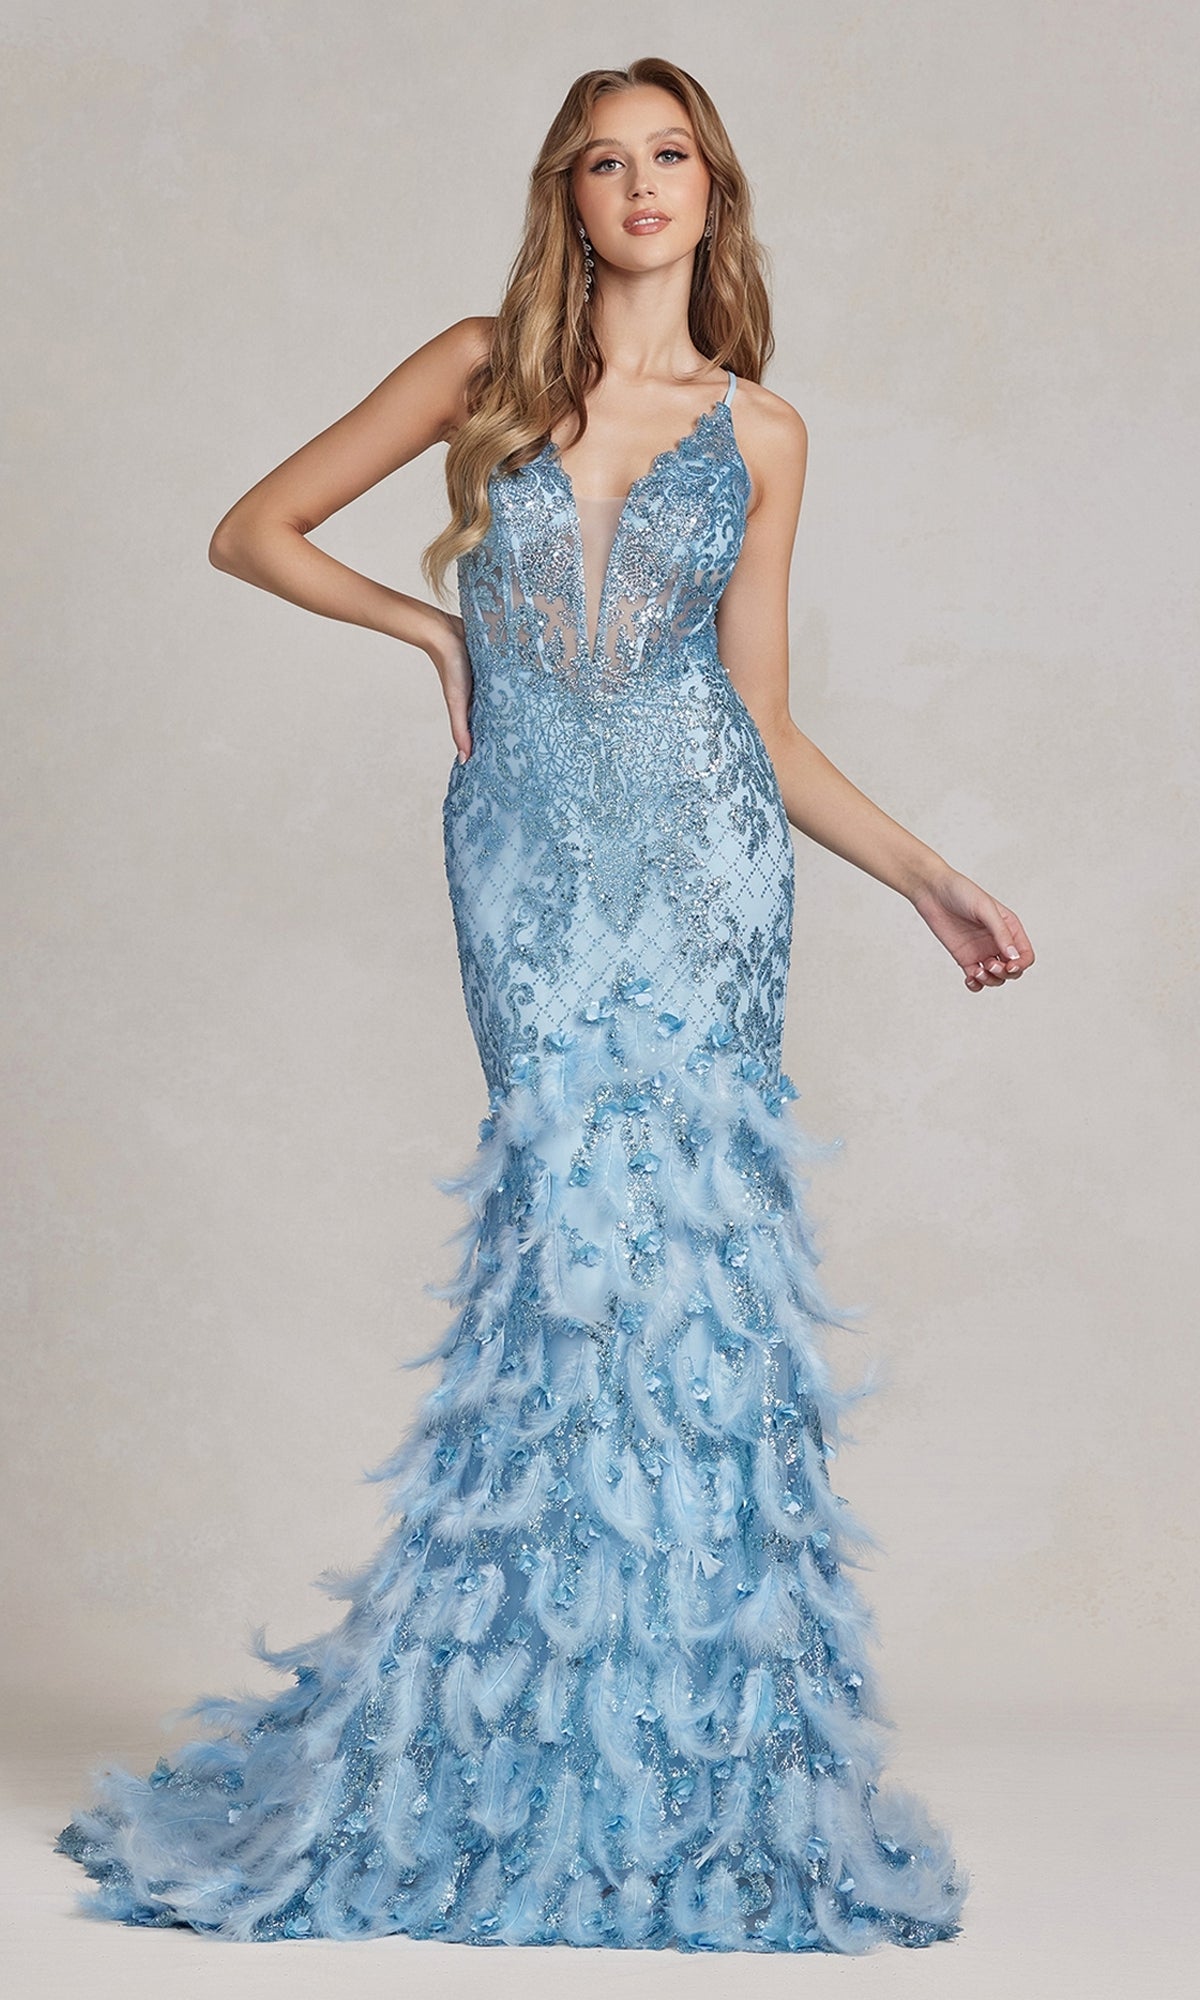 Sequin Prom Dress with Feather Skirt - PromGirl